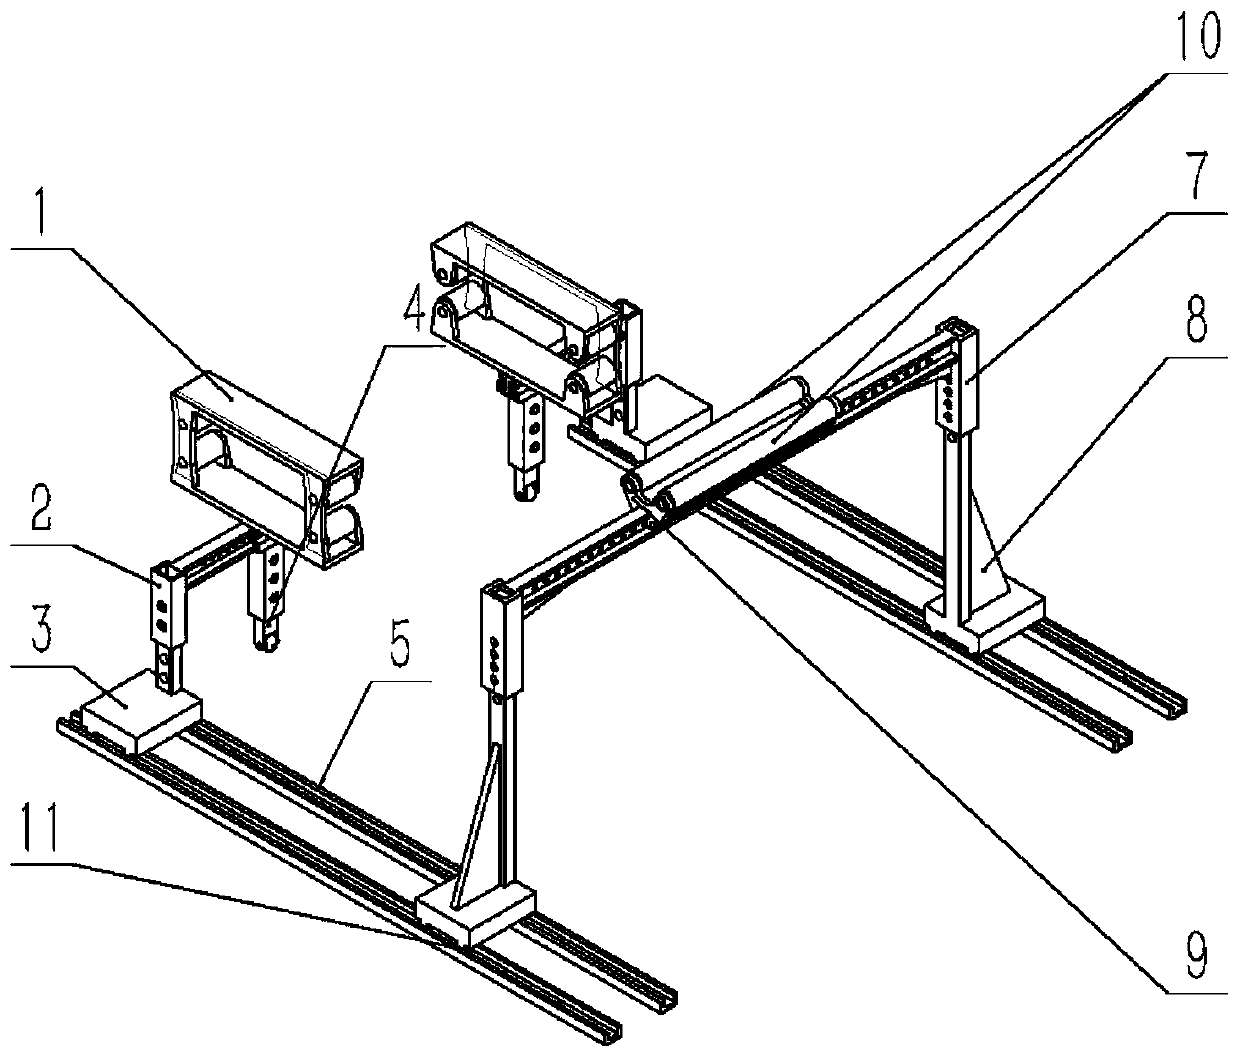 A supporting device for a plate rolling machine